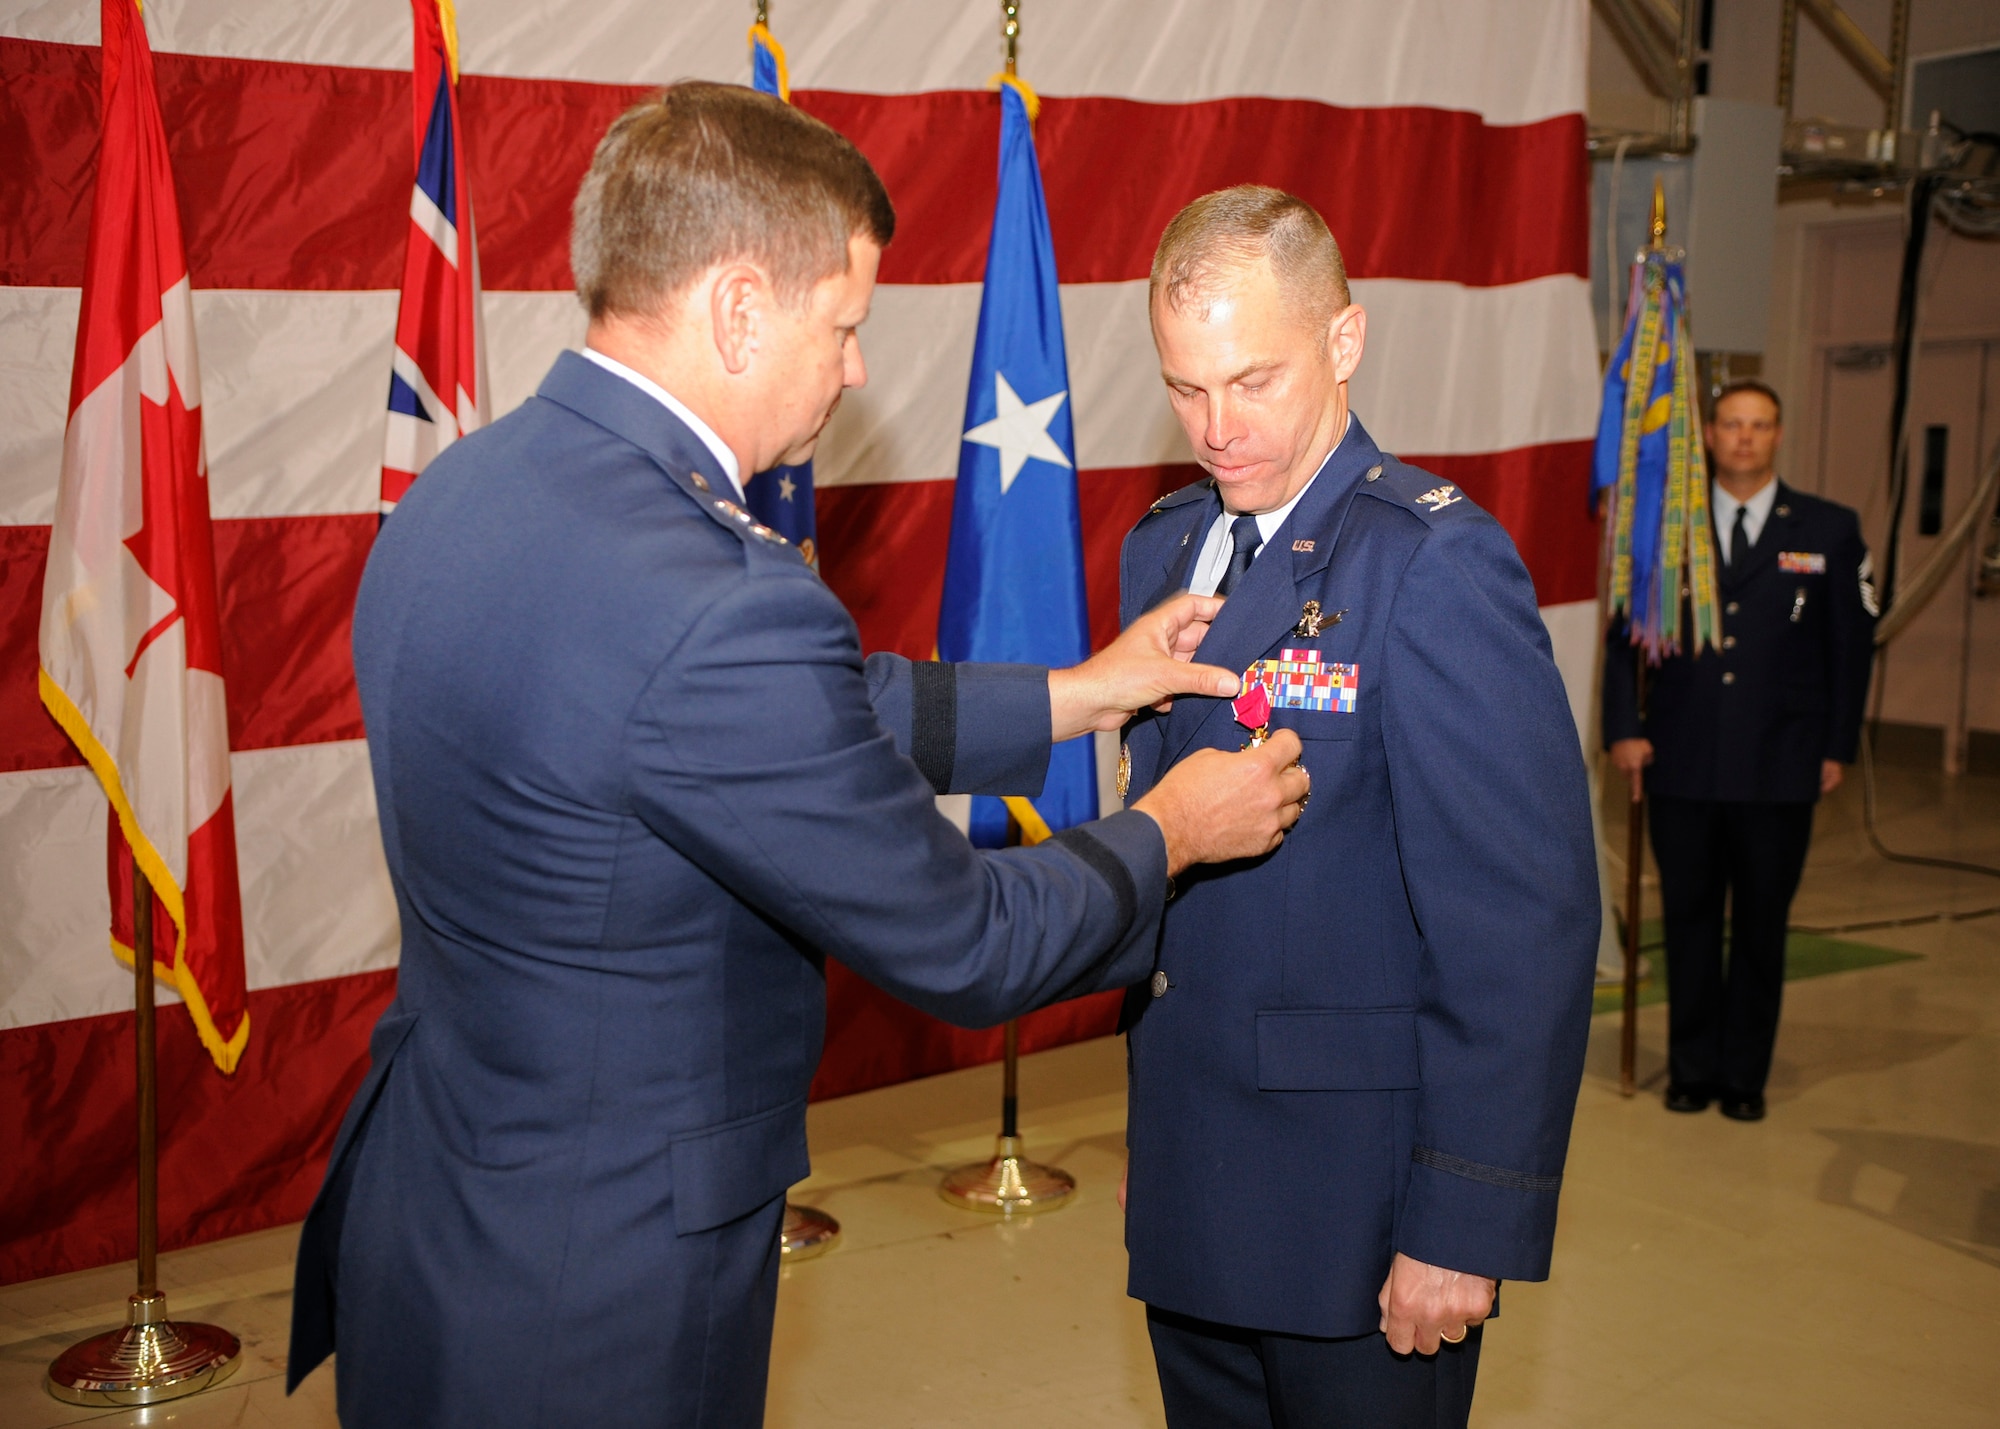 VANDENBERG AIR FORCE BASE, Calif. -- Maj. Gen. Leonard Patrick, 2nd Air Force commander, awards Col. Michael Lutton, 381st Training Group commander, with the Legion of Merit medal before the 381st TRG change of command ceremony here June 13, 2012. Lutton commanded the 381st TRG from July 7, 2010 to June 13, 2012. (U.S. Air Force photo/Michael Peterson)